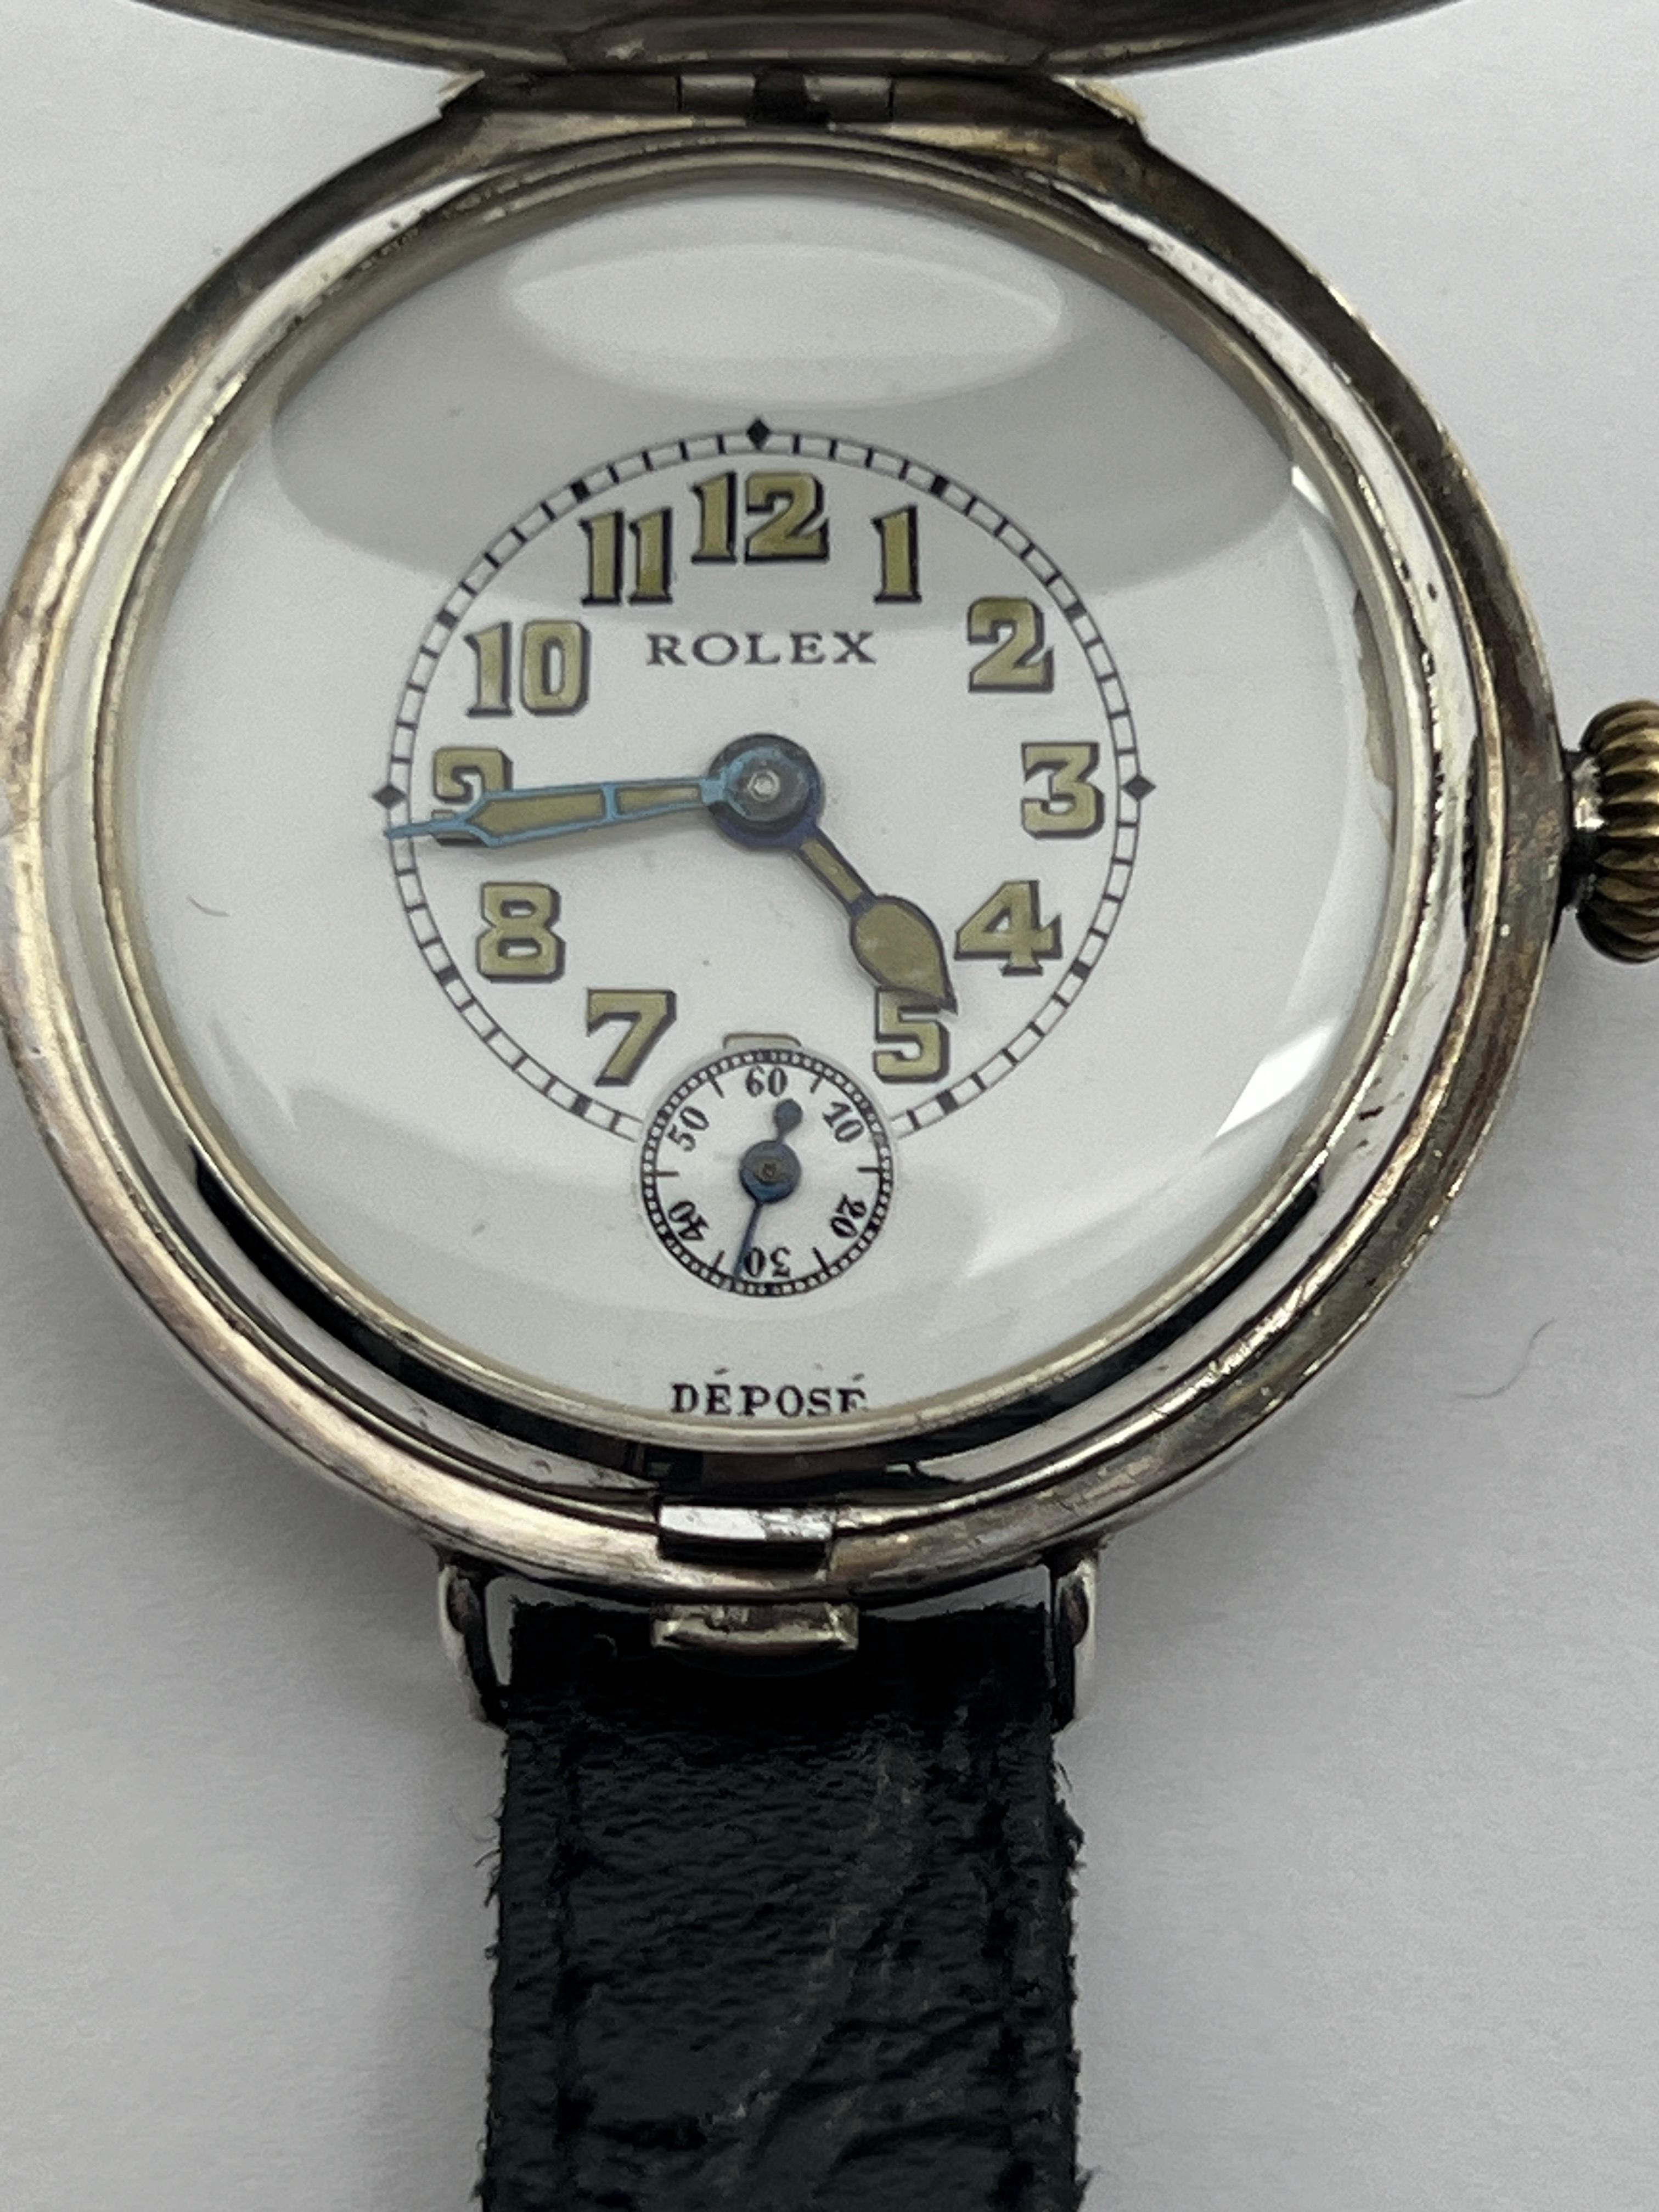 But first, I have a shameless plug! My shop was recently selected to supply vintage American watches for a premier movie starring some major actors and a world famous director. They were looking for authentic watches that would represent the time